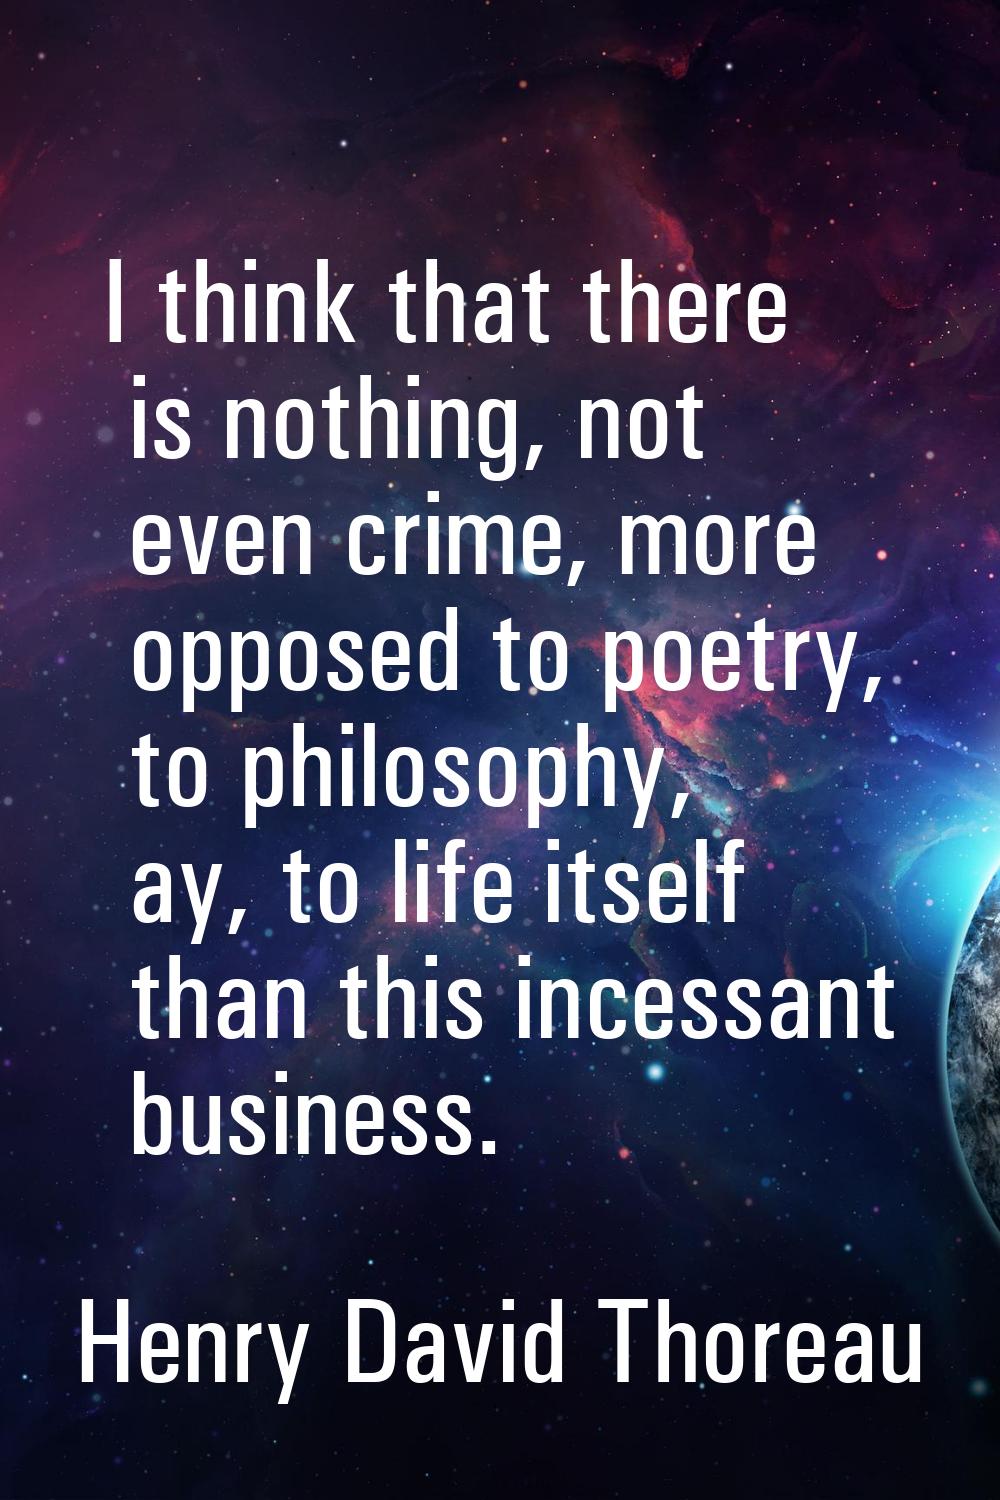 I think that there is nothing, not even crime, more opposed to poetry, to philosophy, ay, to life i